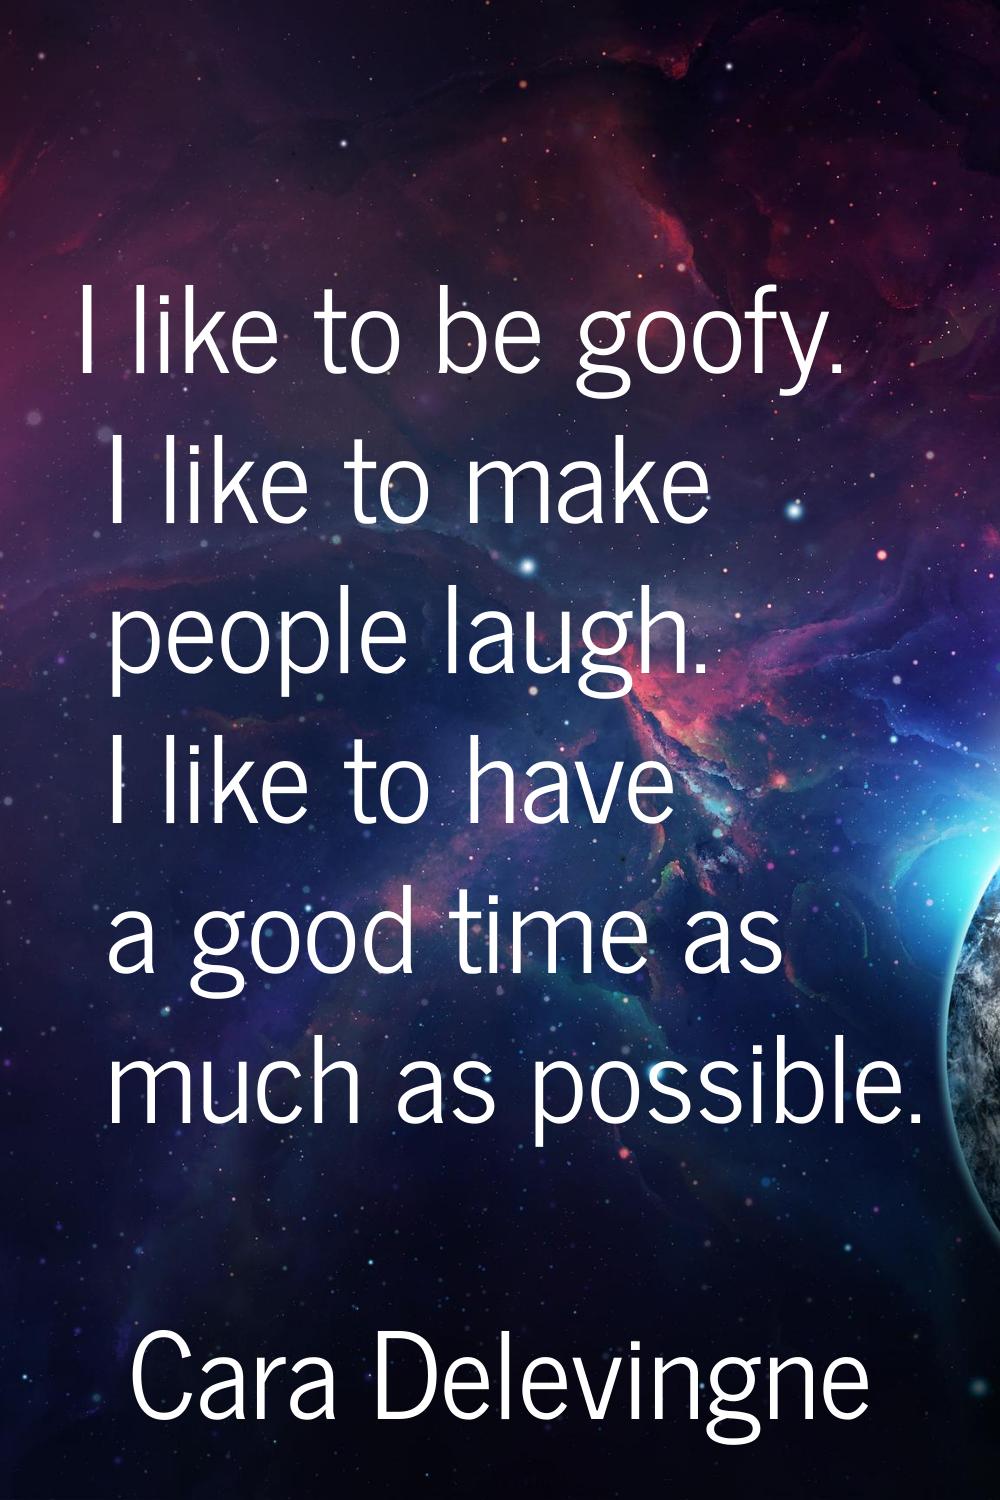 I like to be goofy. I like to make people laugh. I like to have a good time as much as possible.